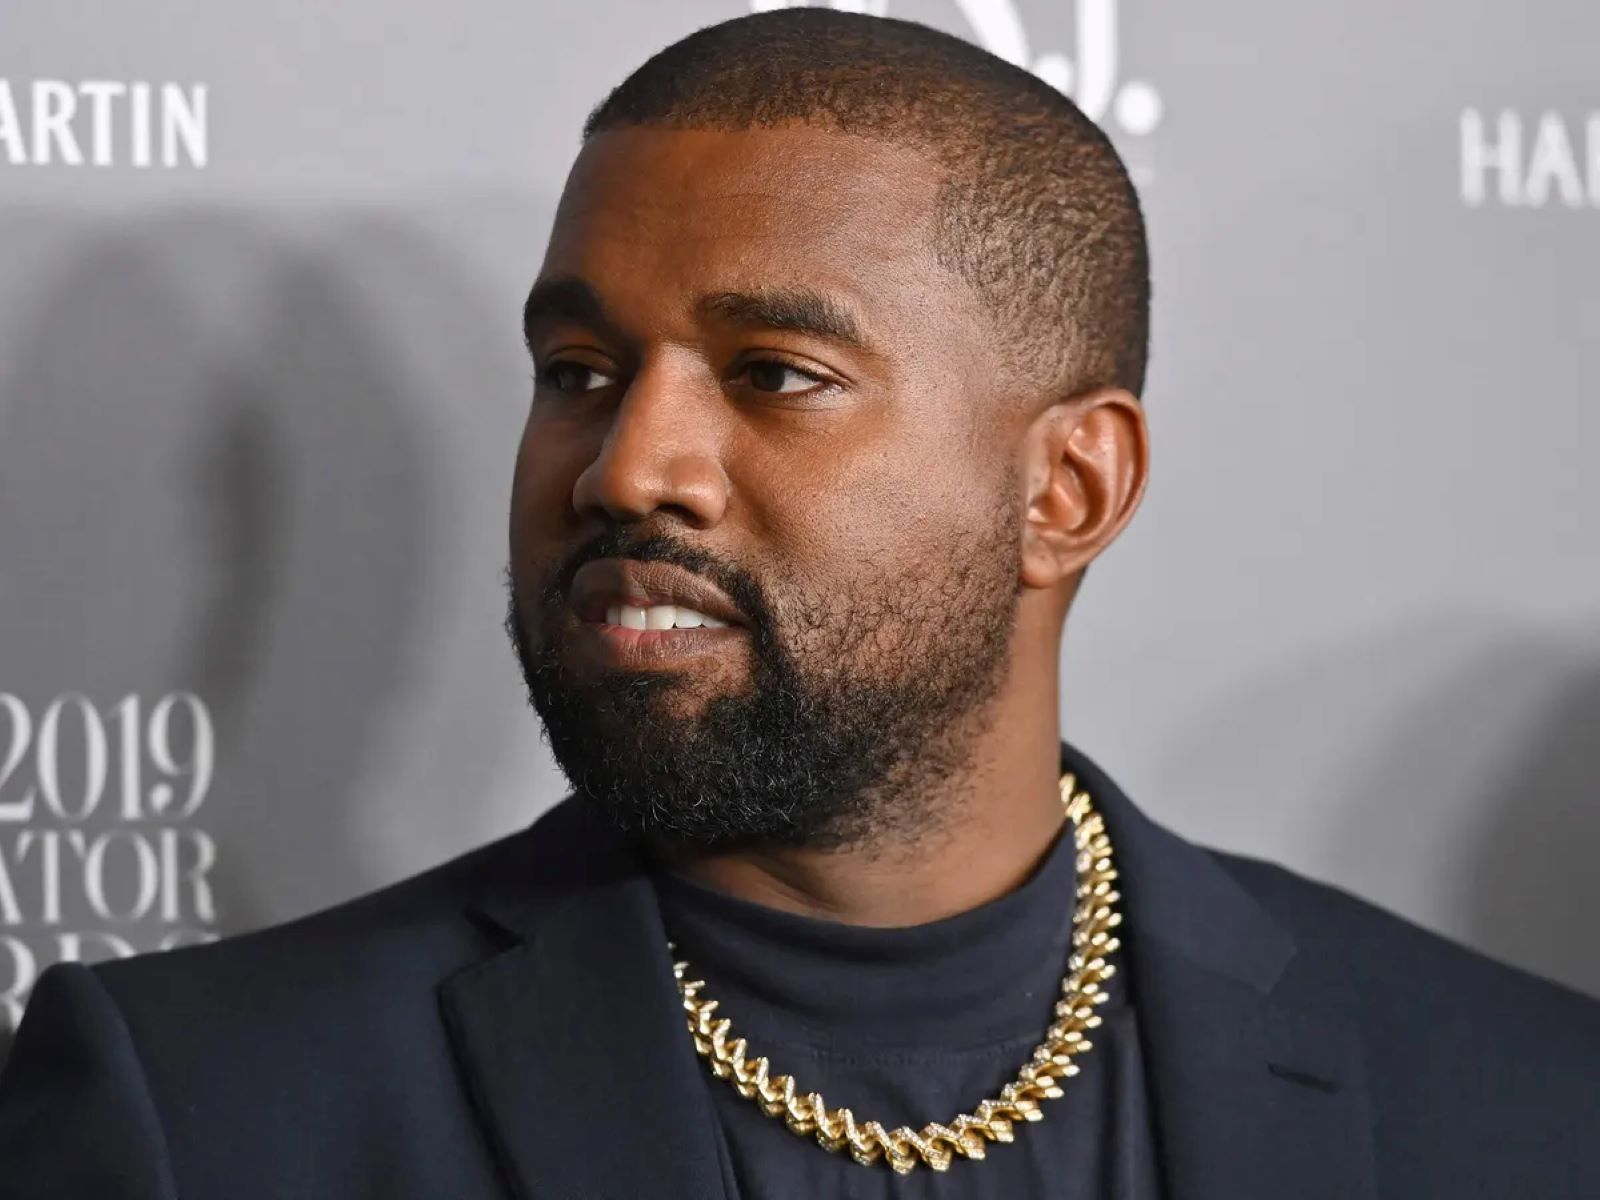 Kanye West Sued Over Demands To Build Home Without Windows Or Electricity